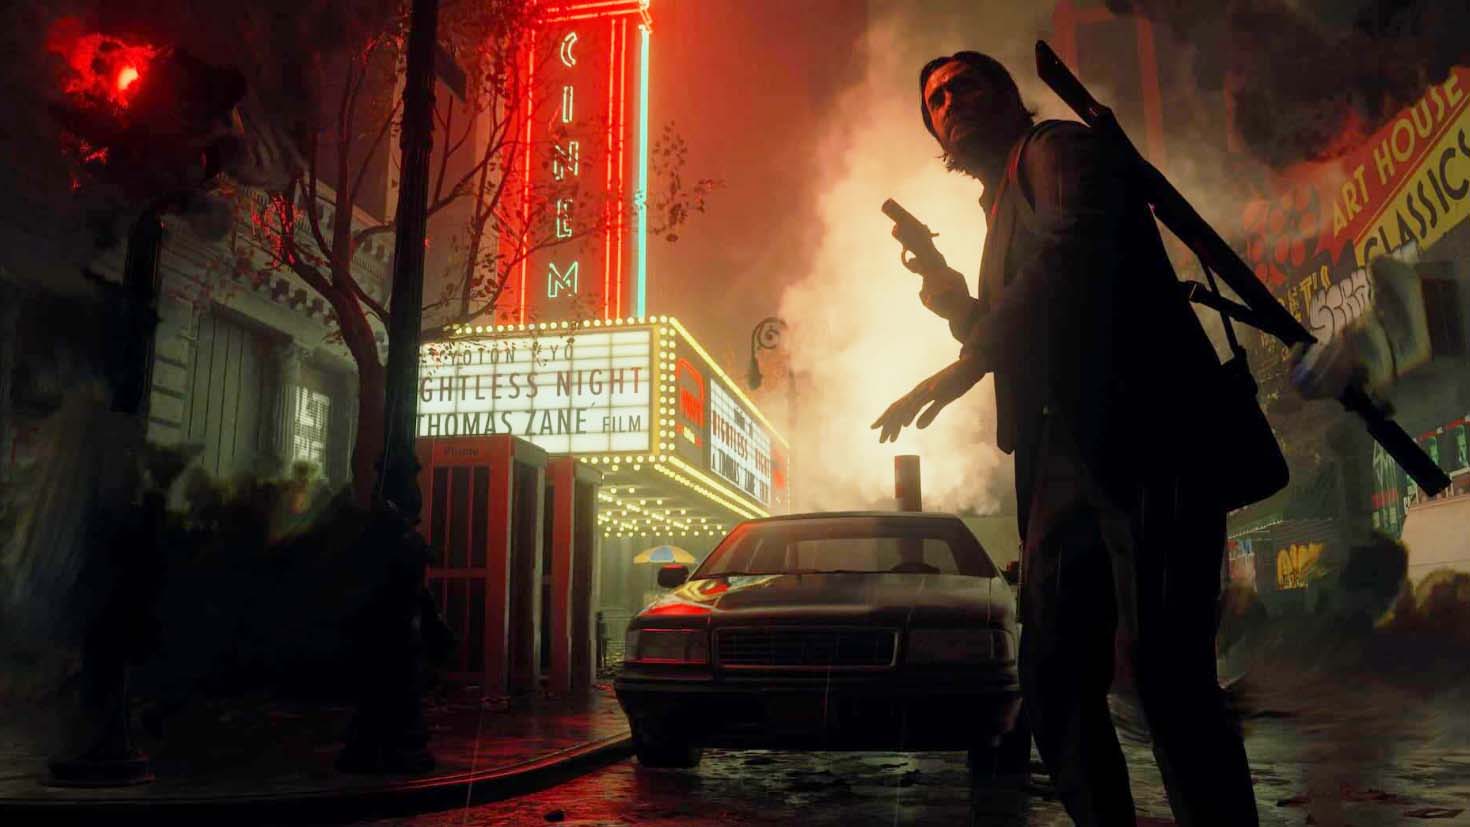 Alan Wake 2 works on the Steam Deck but only with user assistance